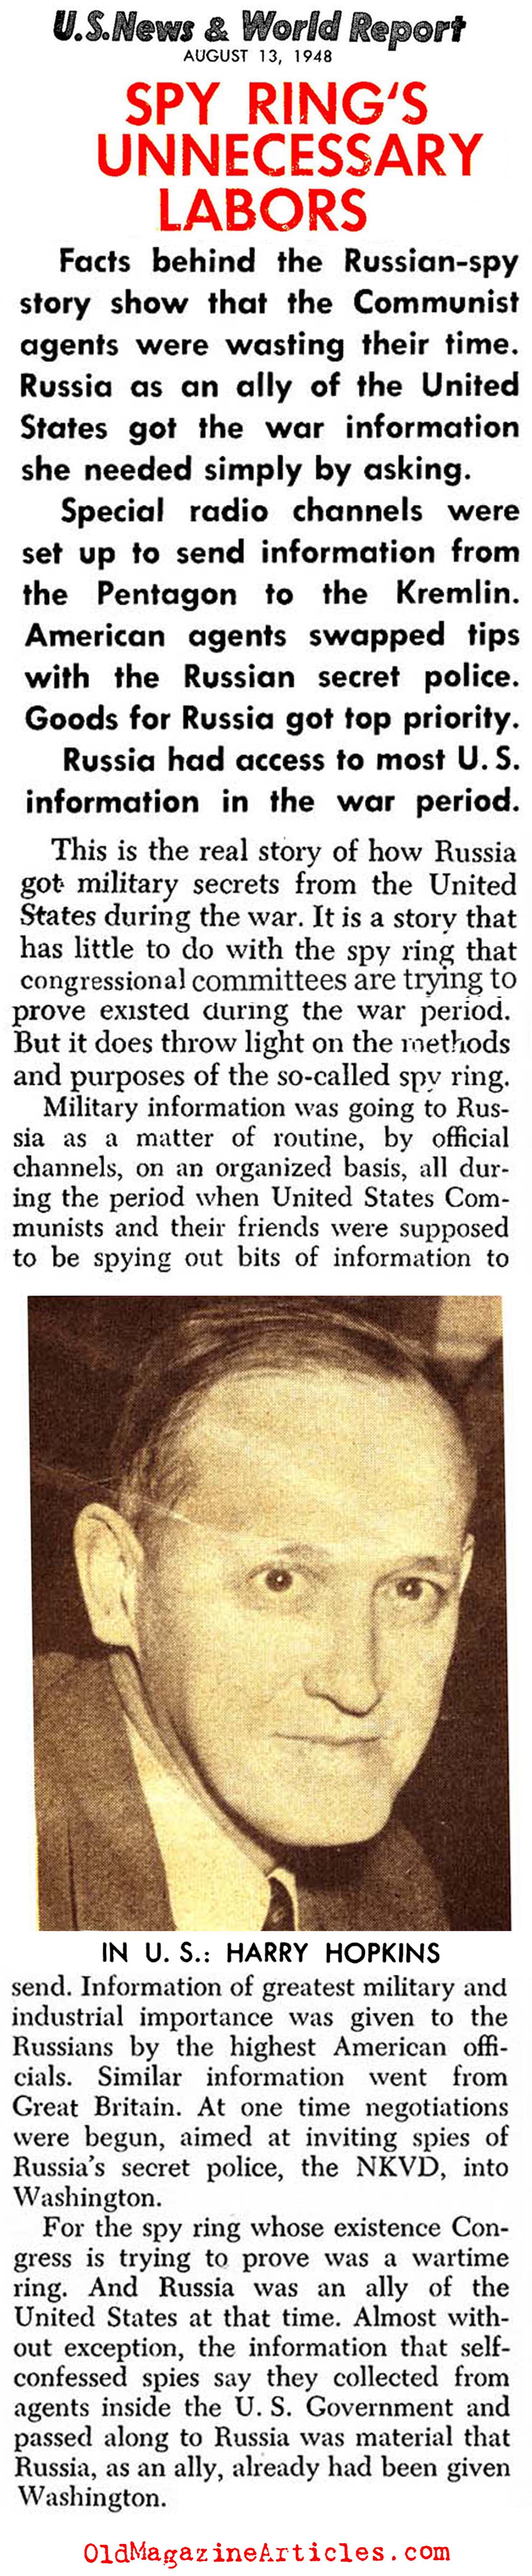 File Sharing (United States News & World Report, 1948)